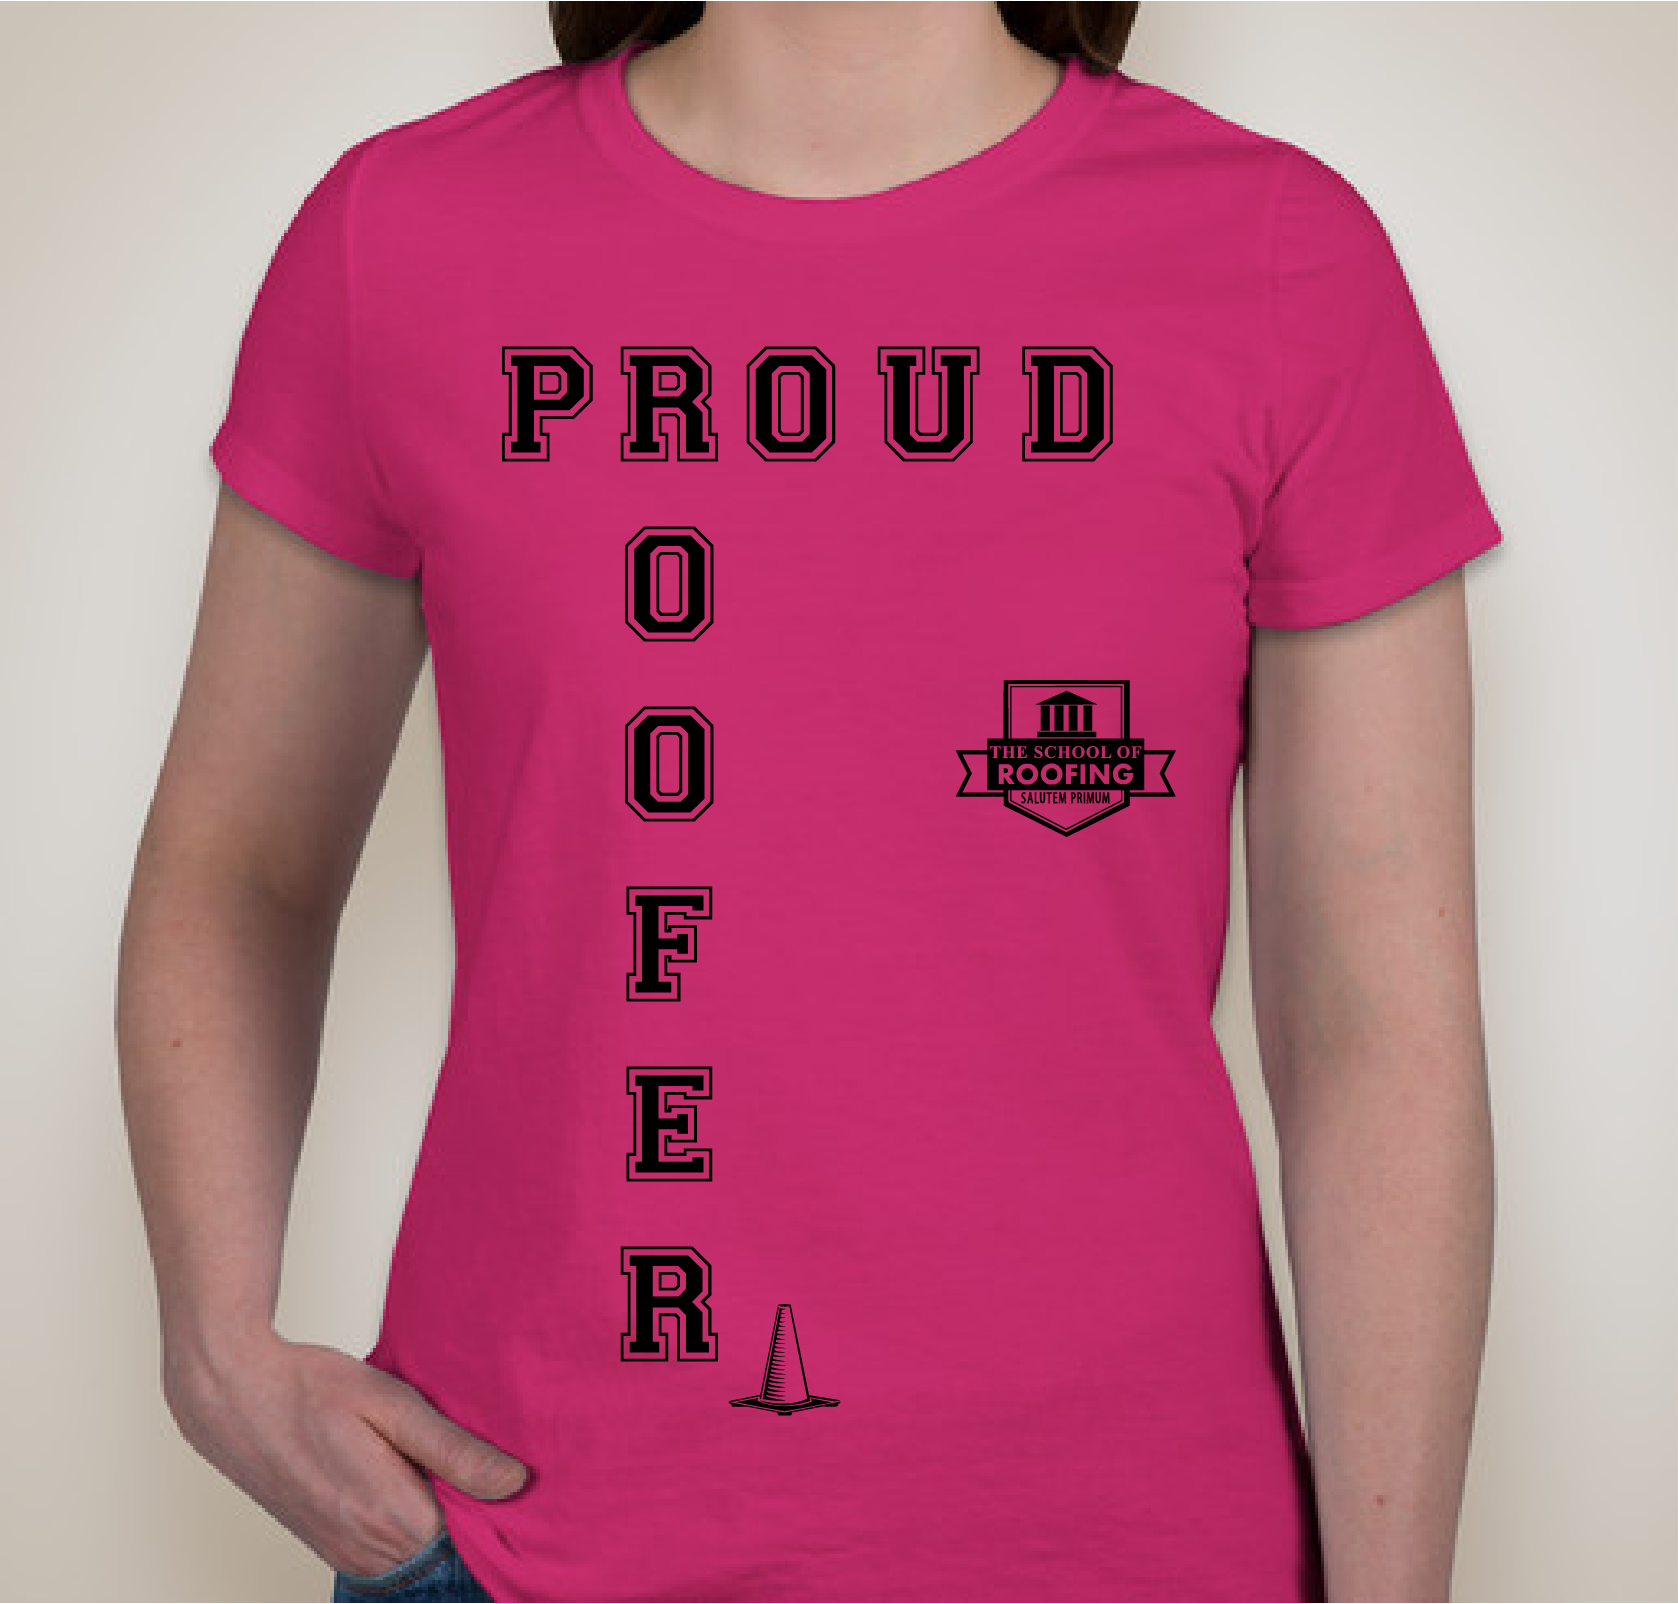 The School of Roofing Fundraiser - unisex shirt design - front